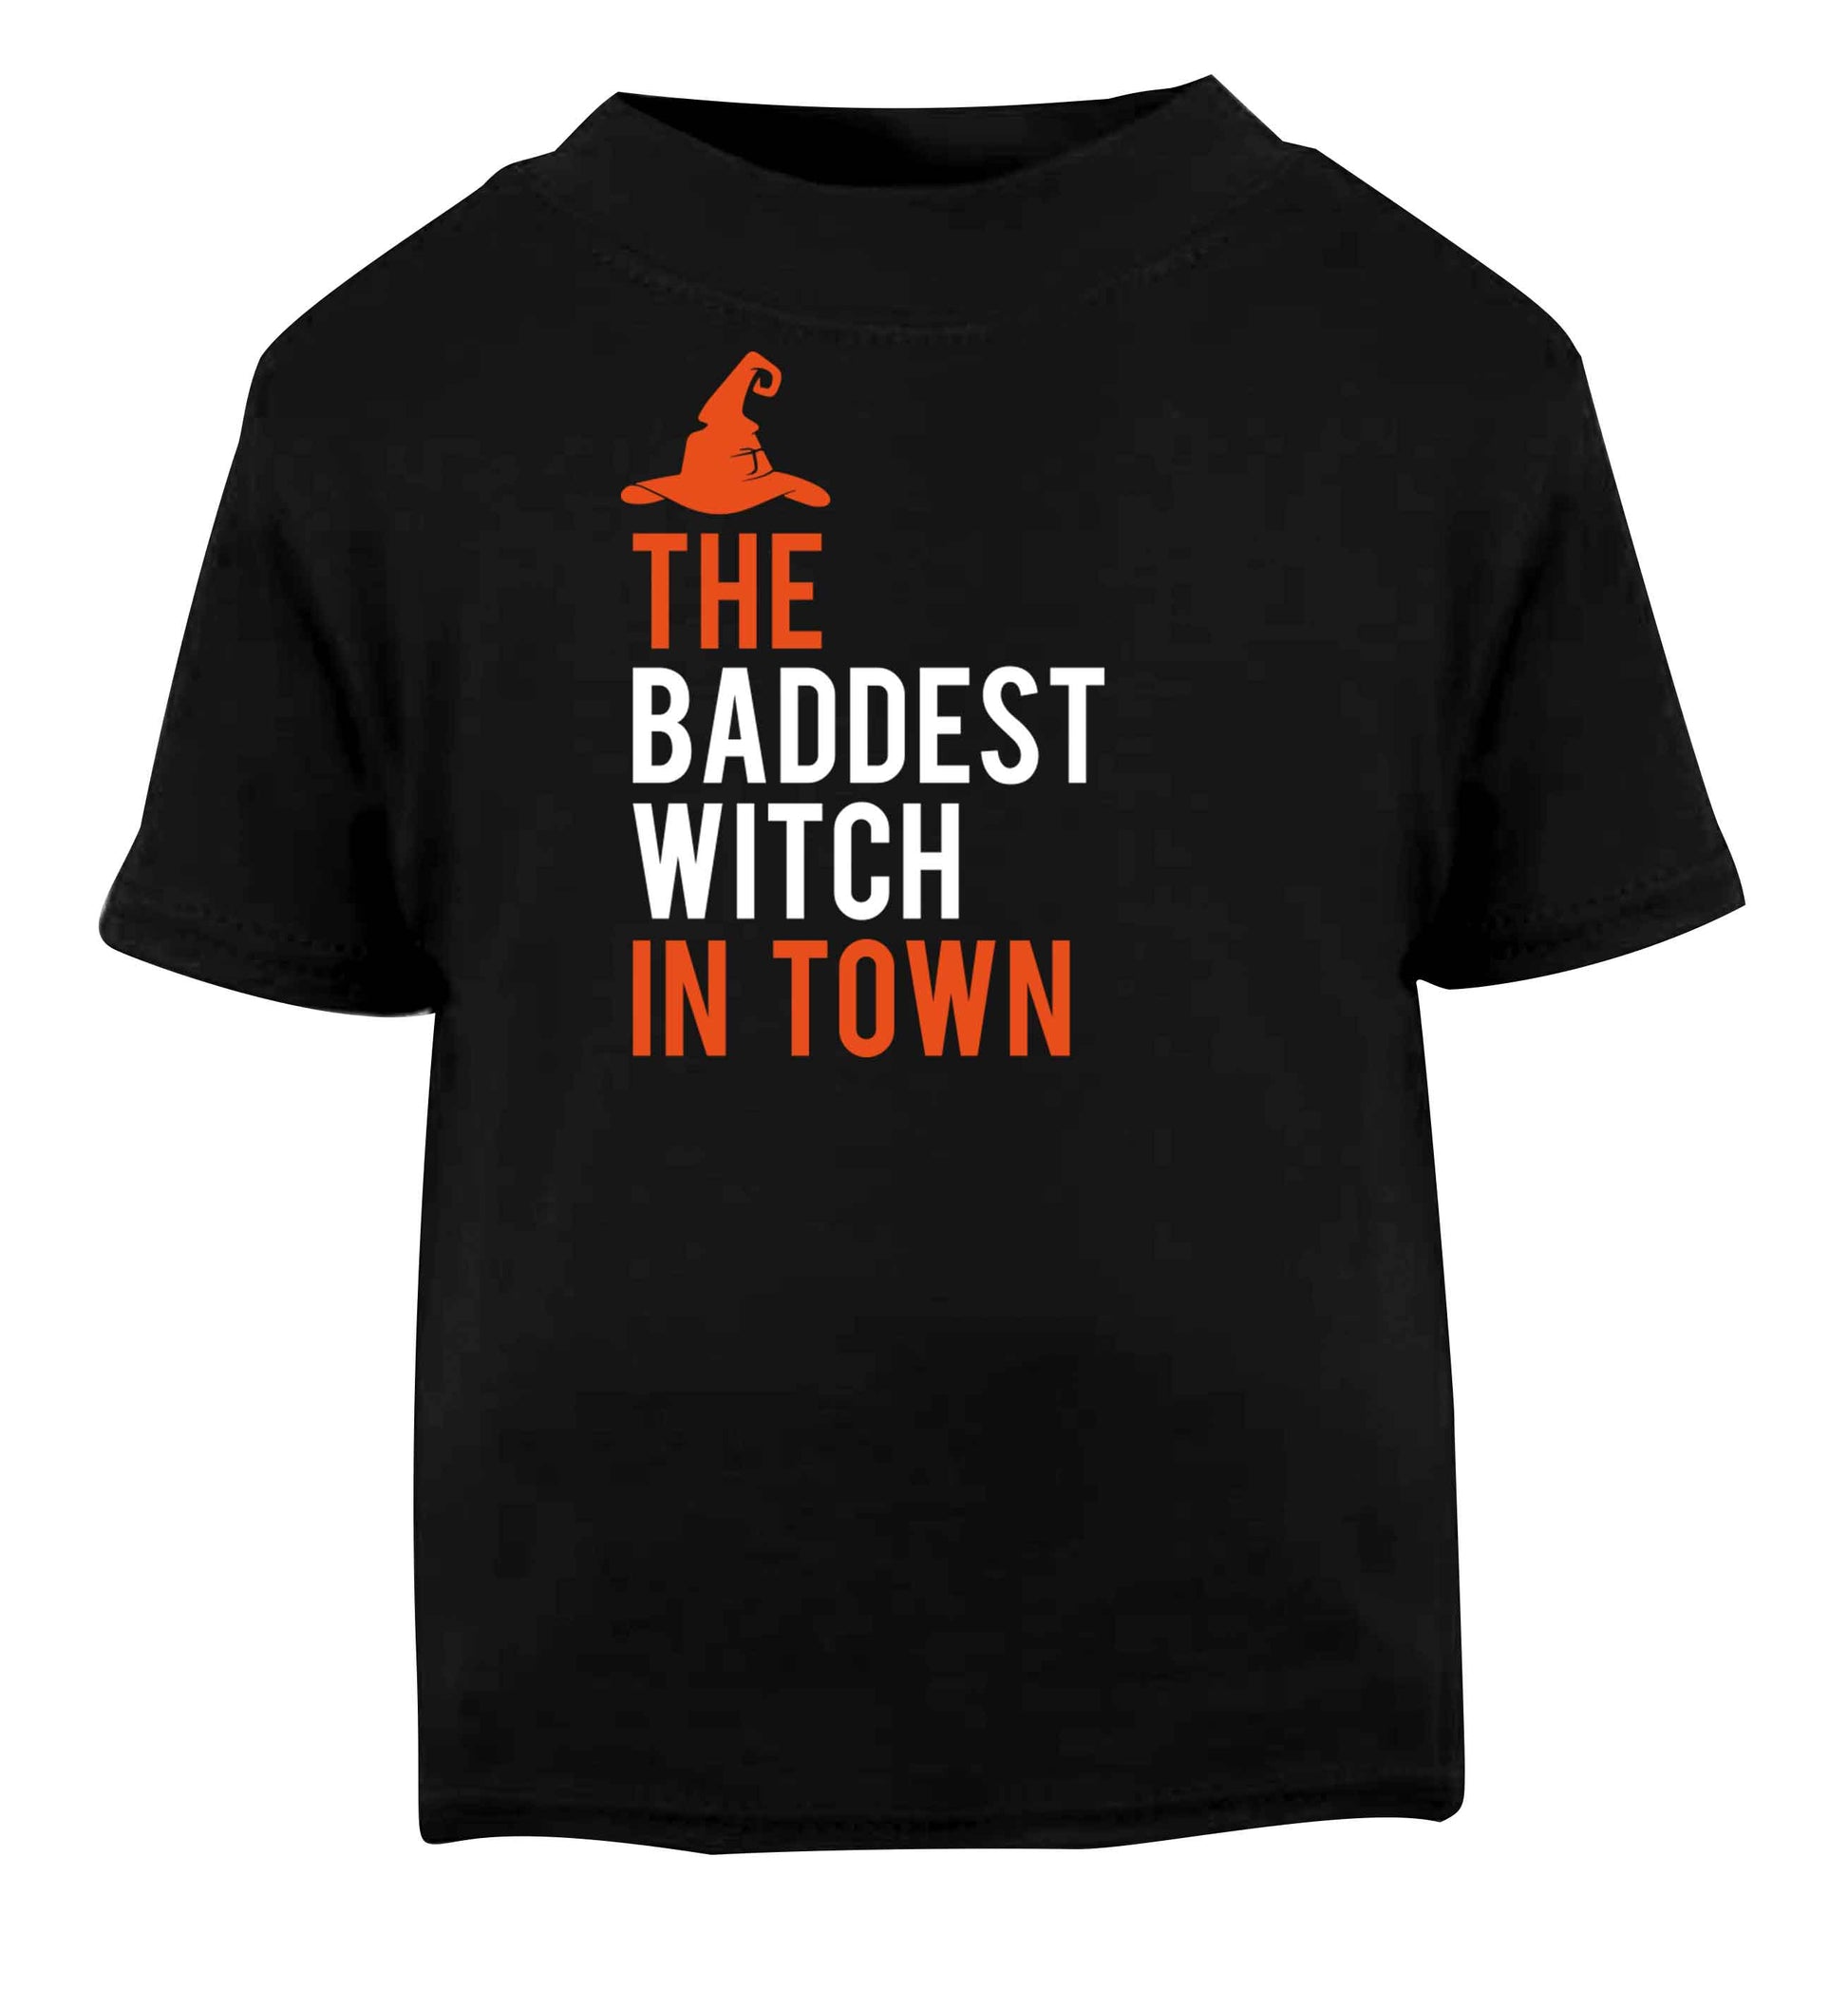 Badest witch in town Black baby toddler Tshirt 2 years